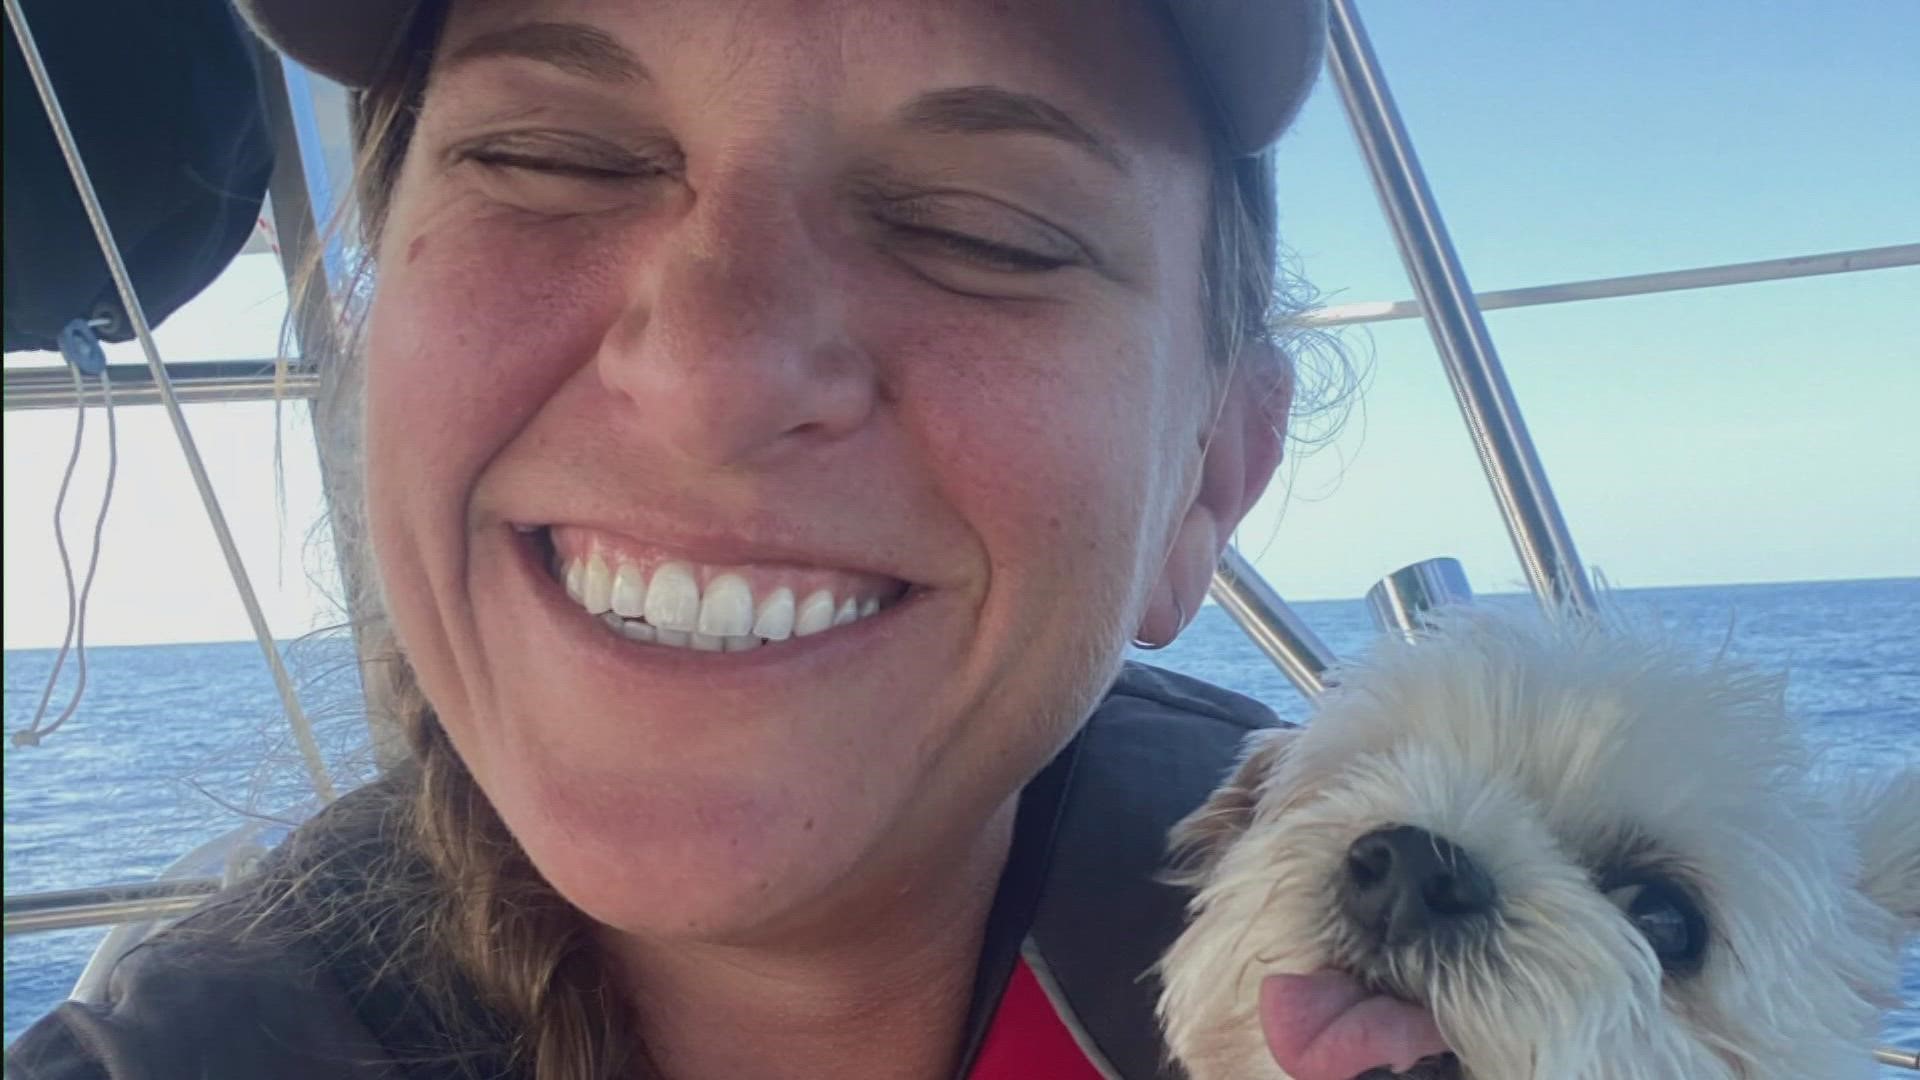 Jenny Decker wants to be the first person with a rare neurological disorder to solo sail around the world. She describes her journey so far.